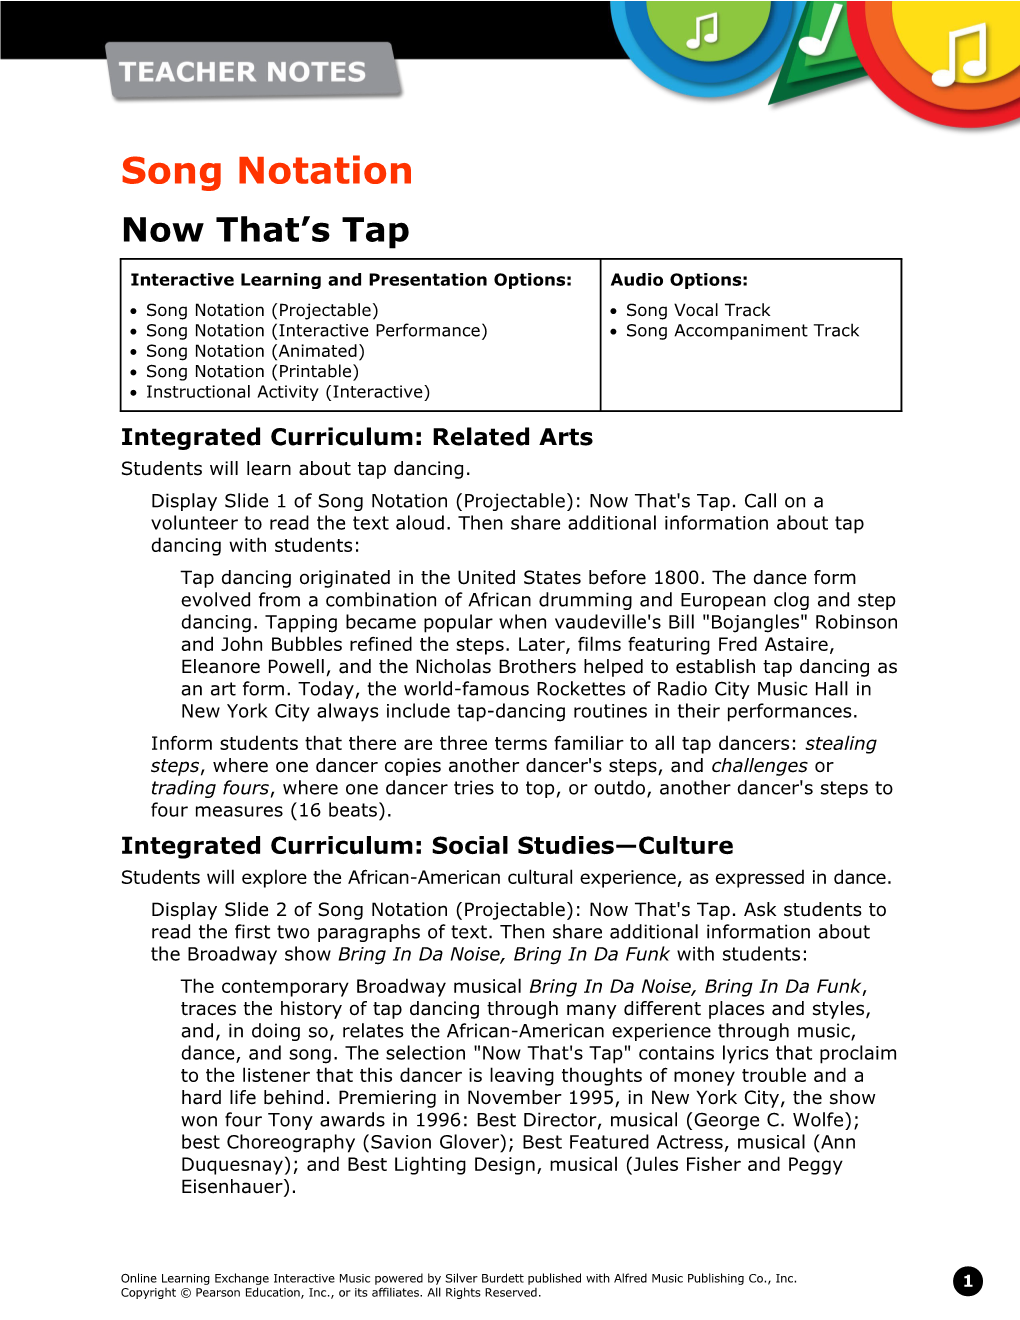 Song Notation